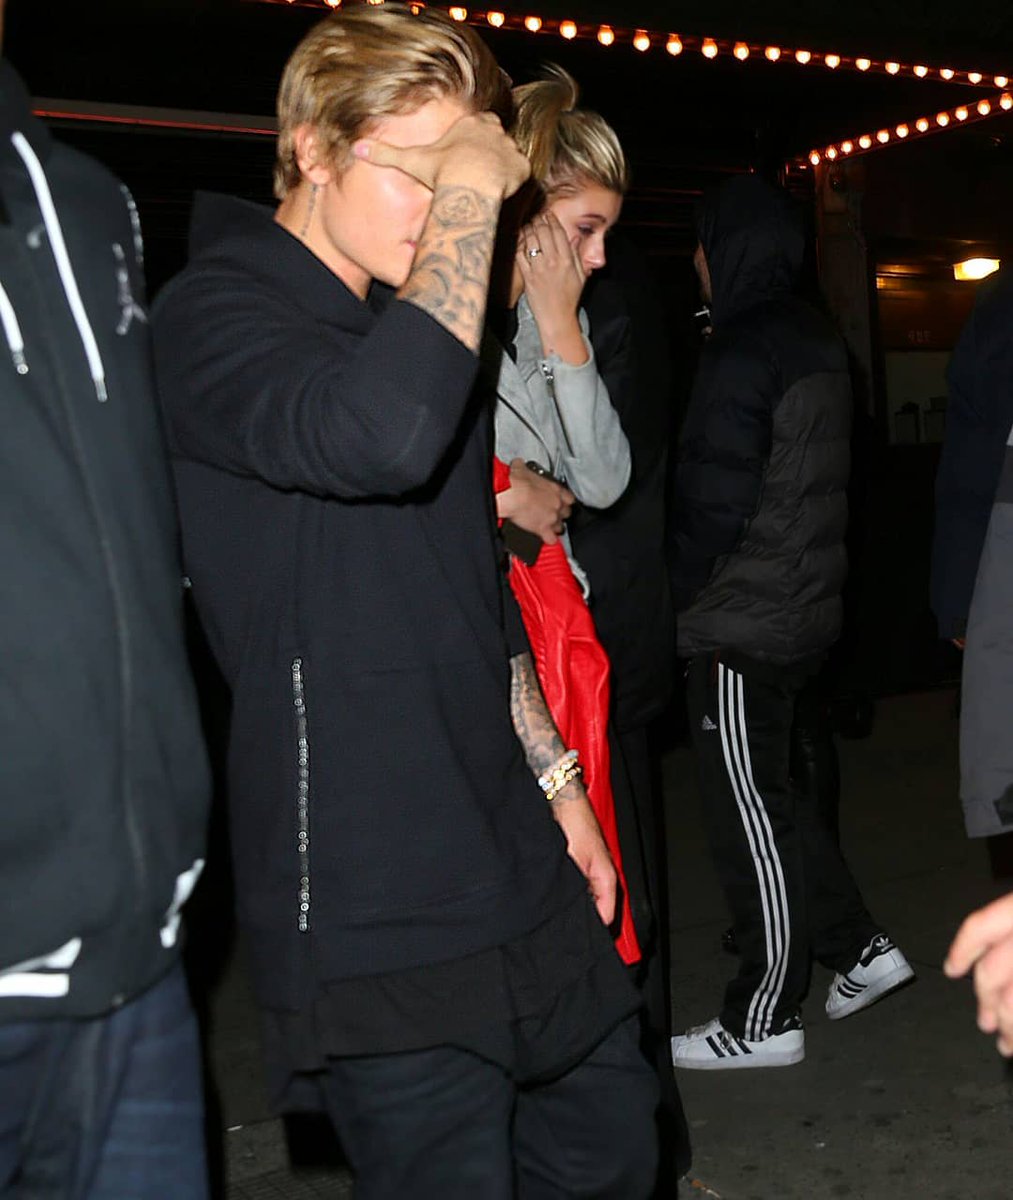 February 13, 2015. Hailey and Justin leaving a club in NYC.